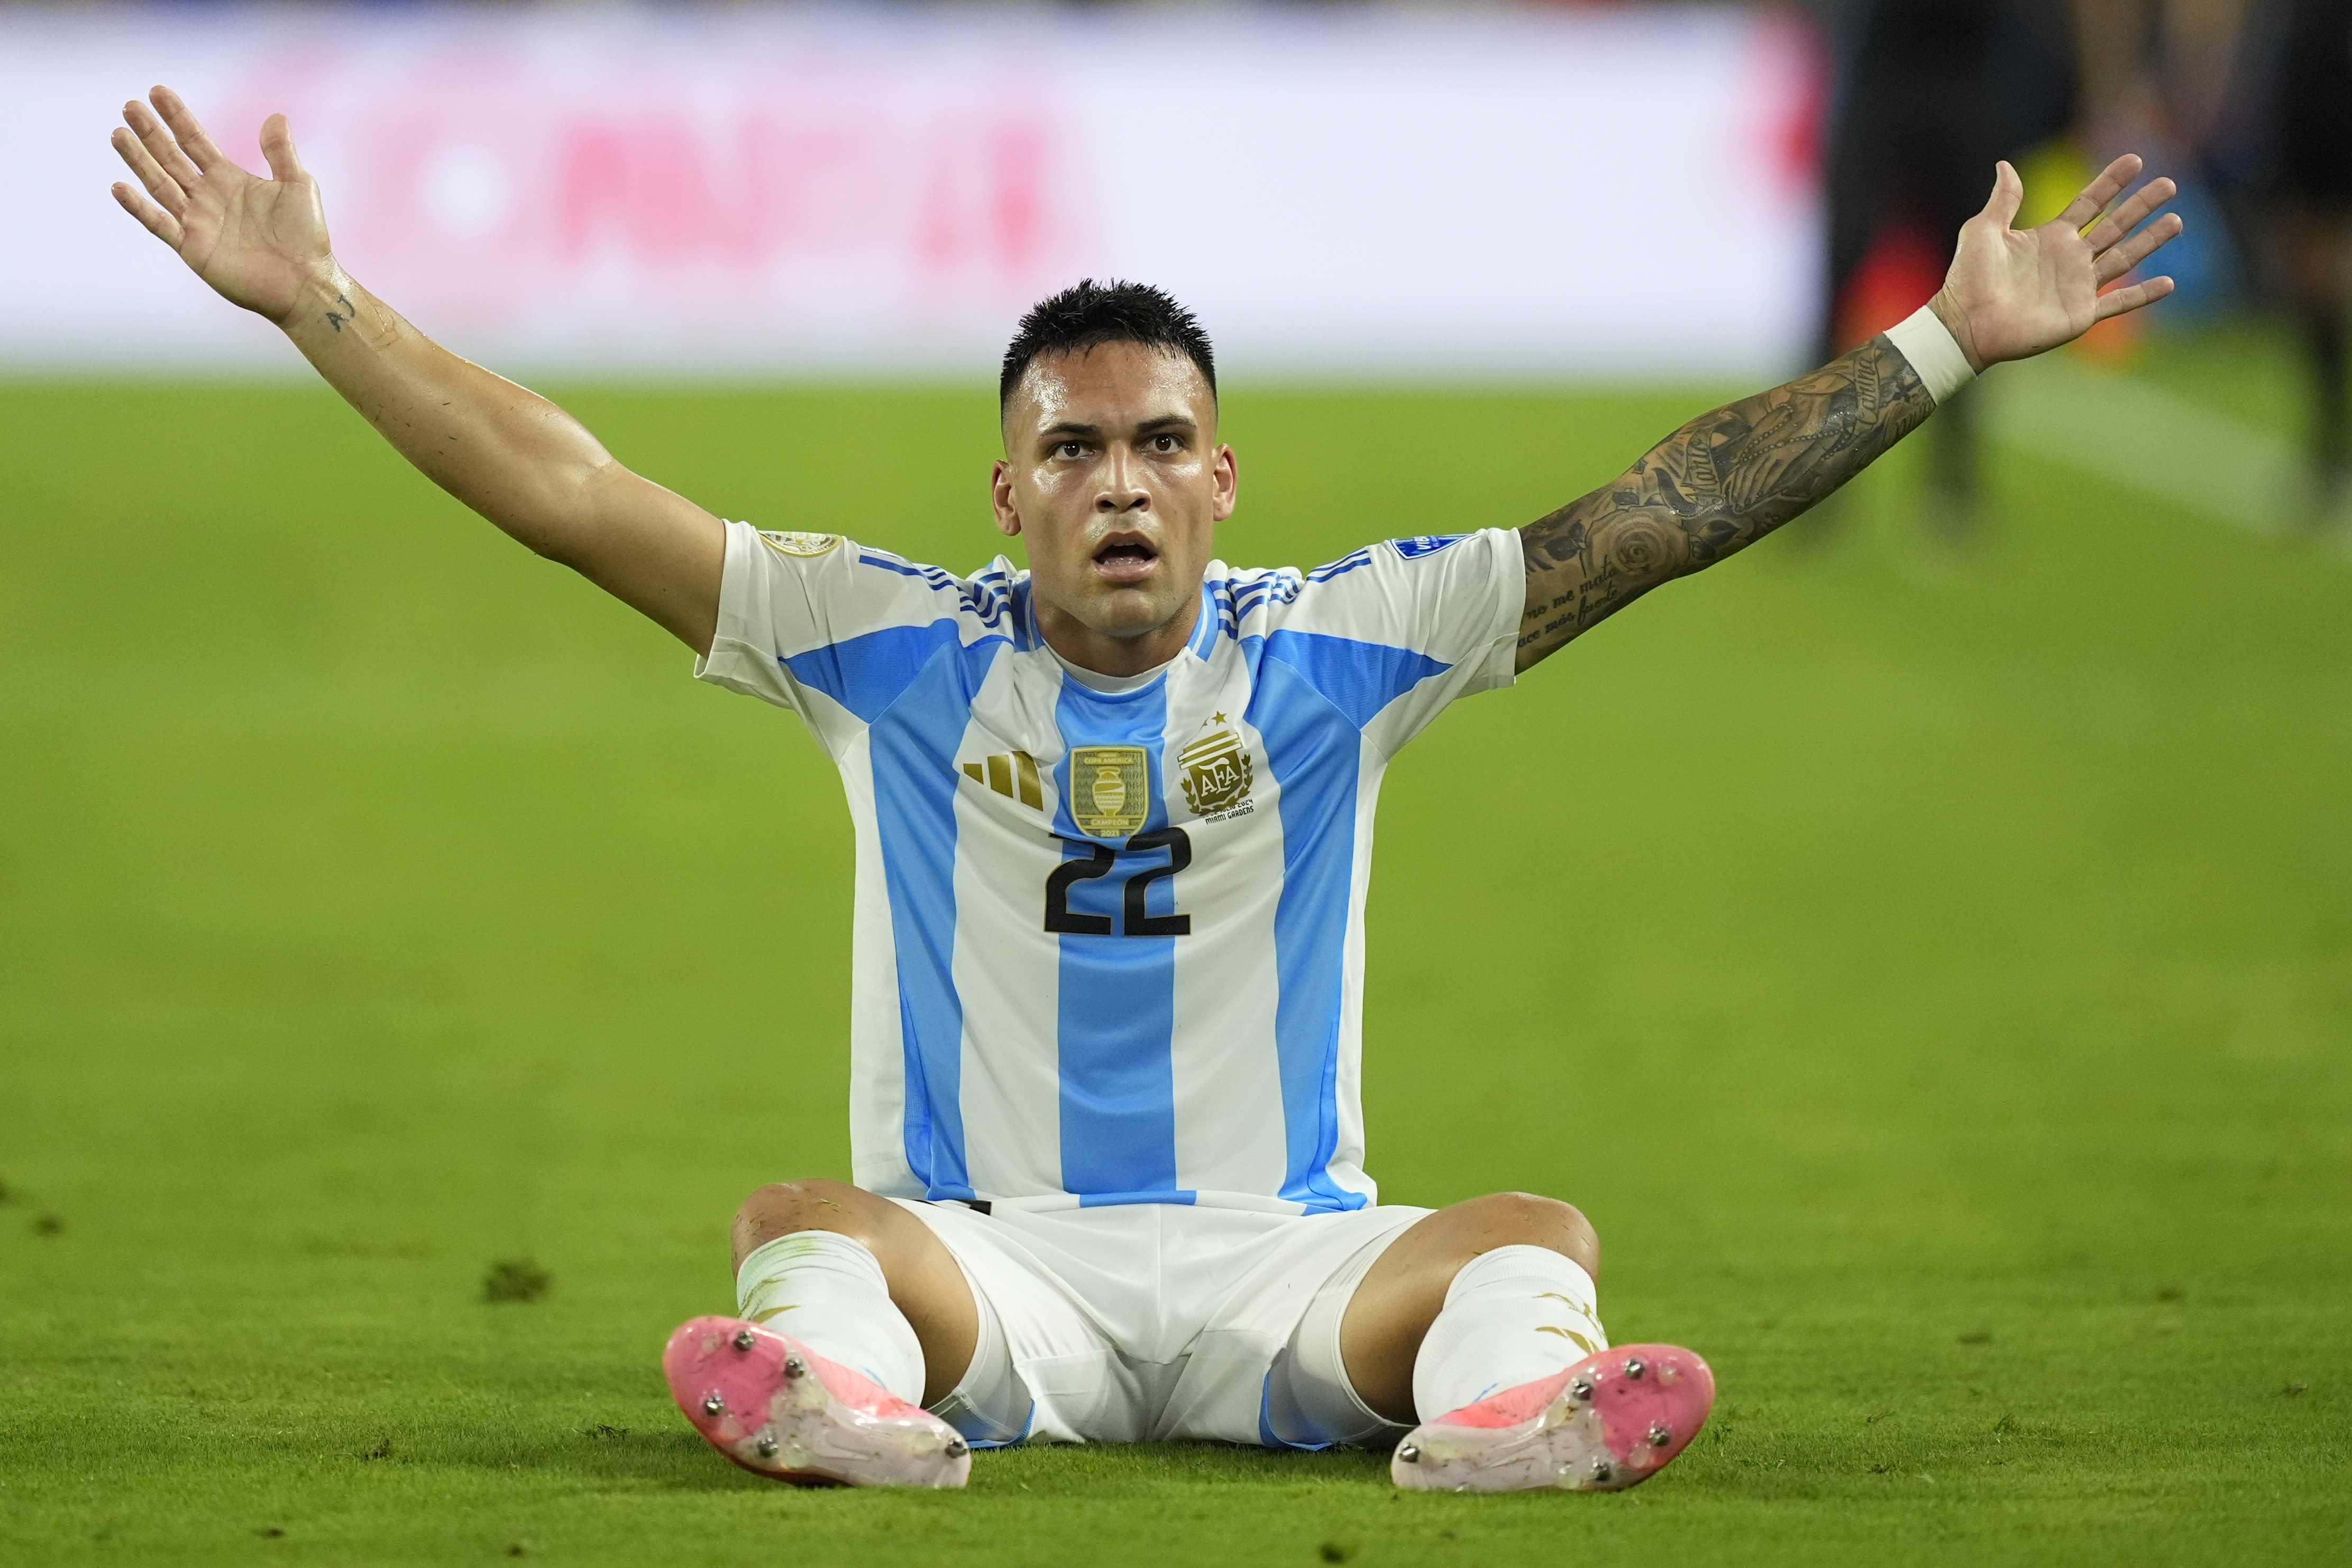 Lautaro Martinez scores an extra-time winner to give Argentina a 1-0 Copa América win over Colombia